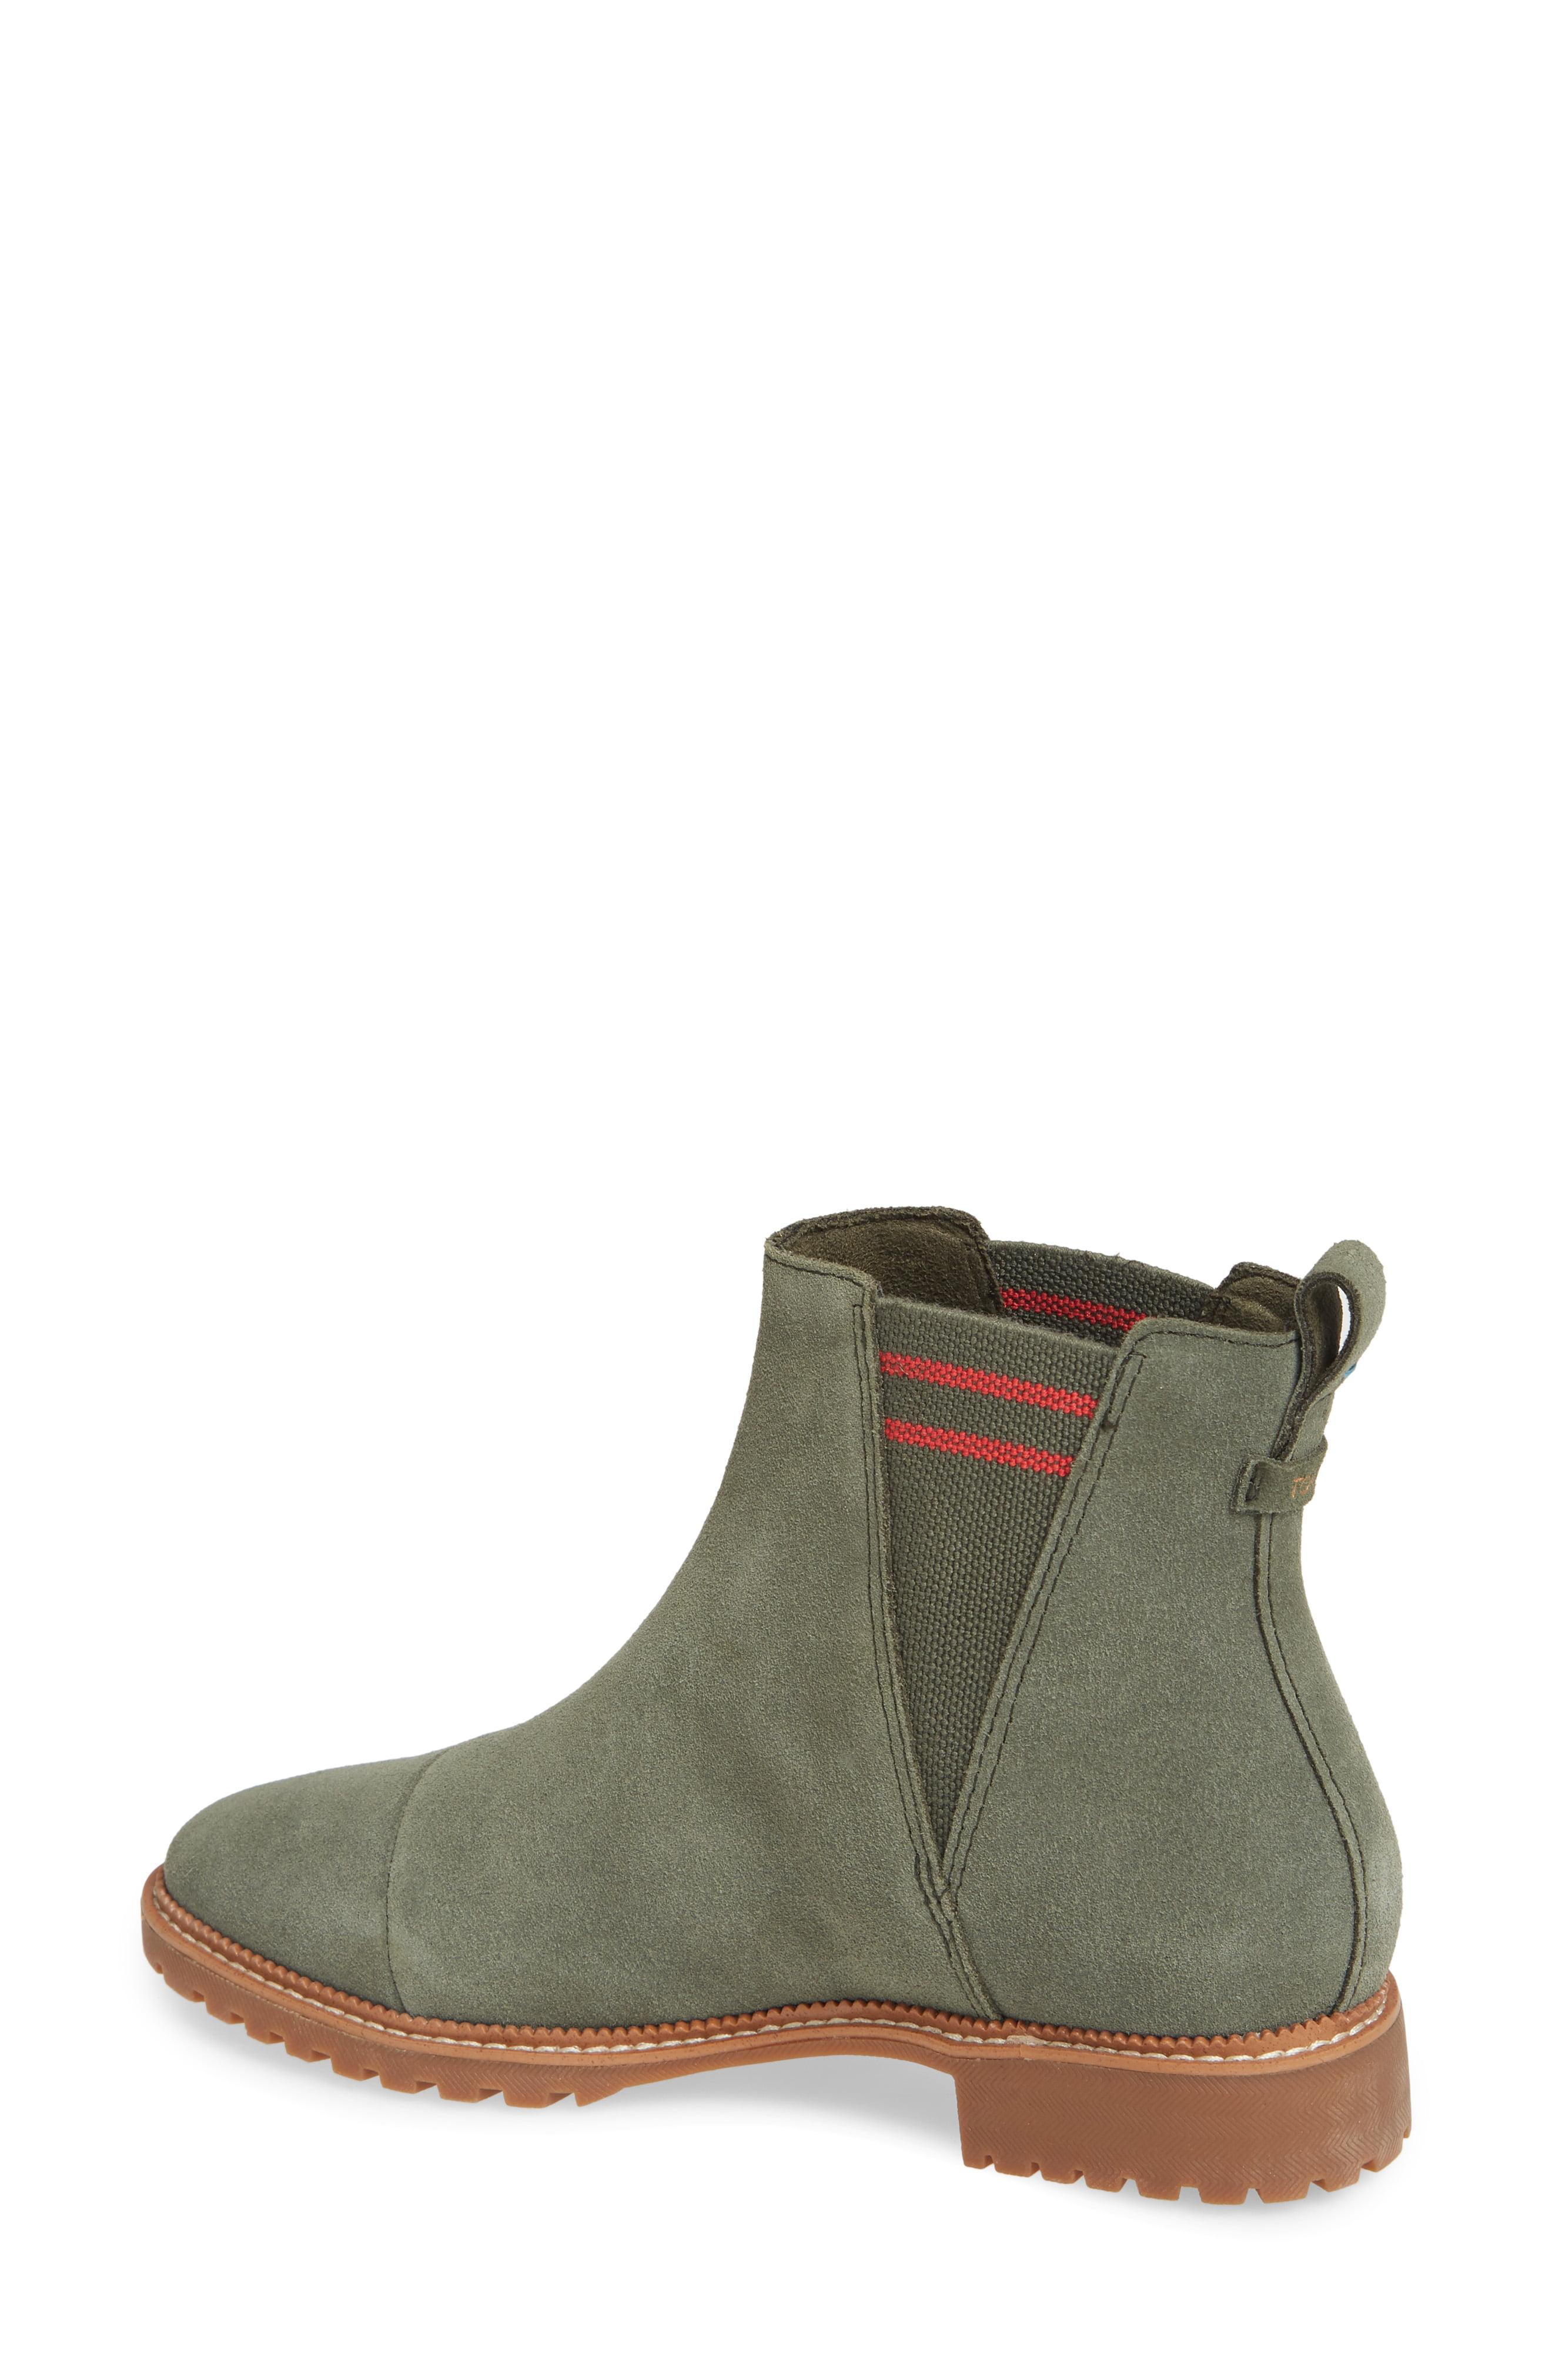 TOMS Cleo Water Resistant Chelsea Boot in Green | Lyst